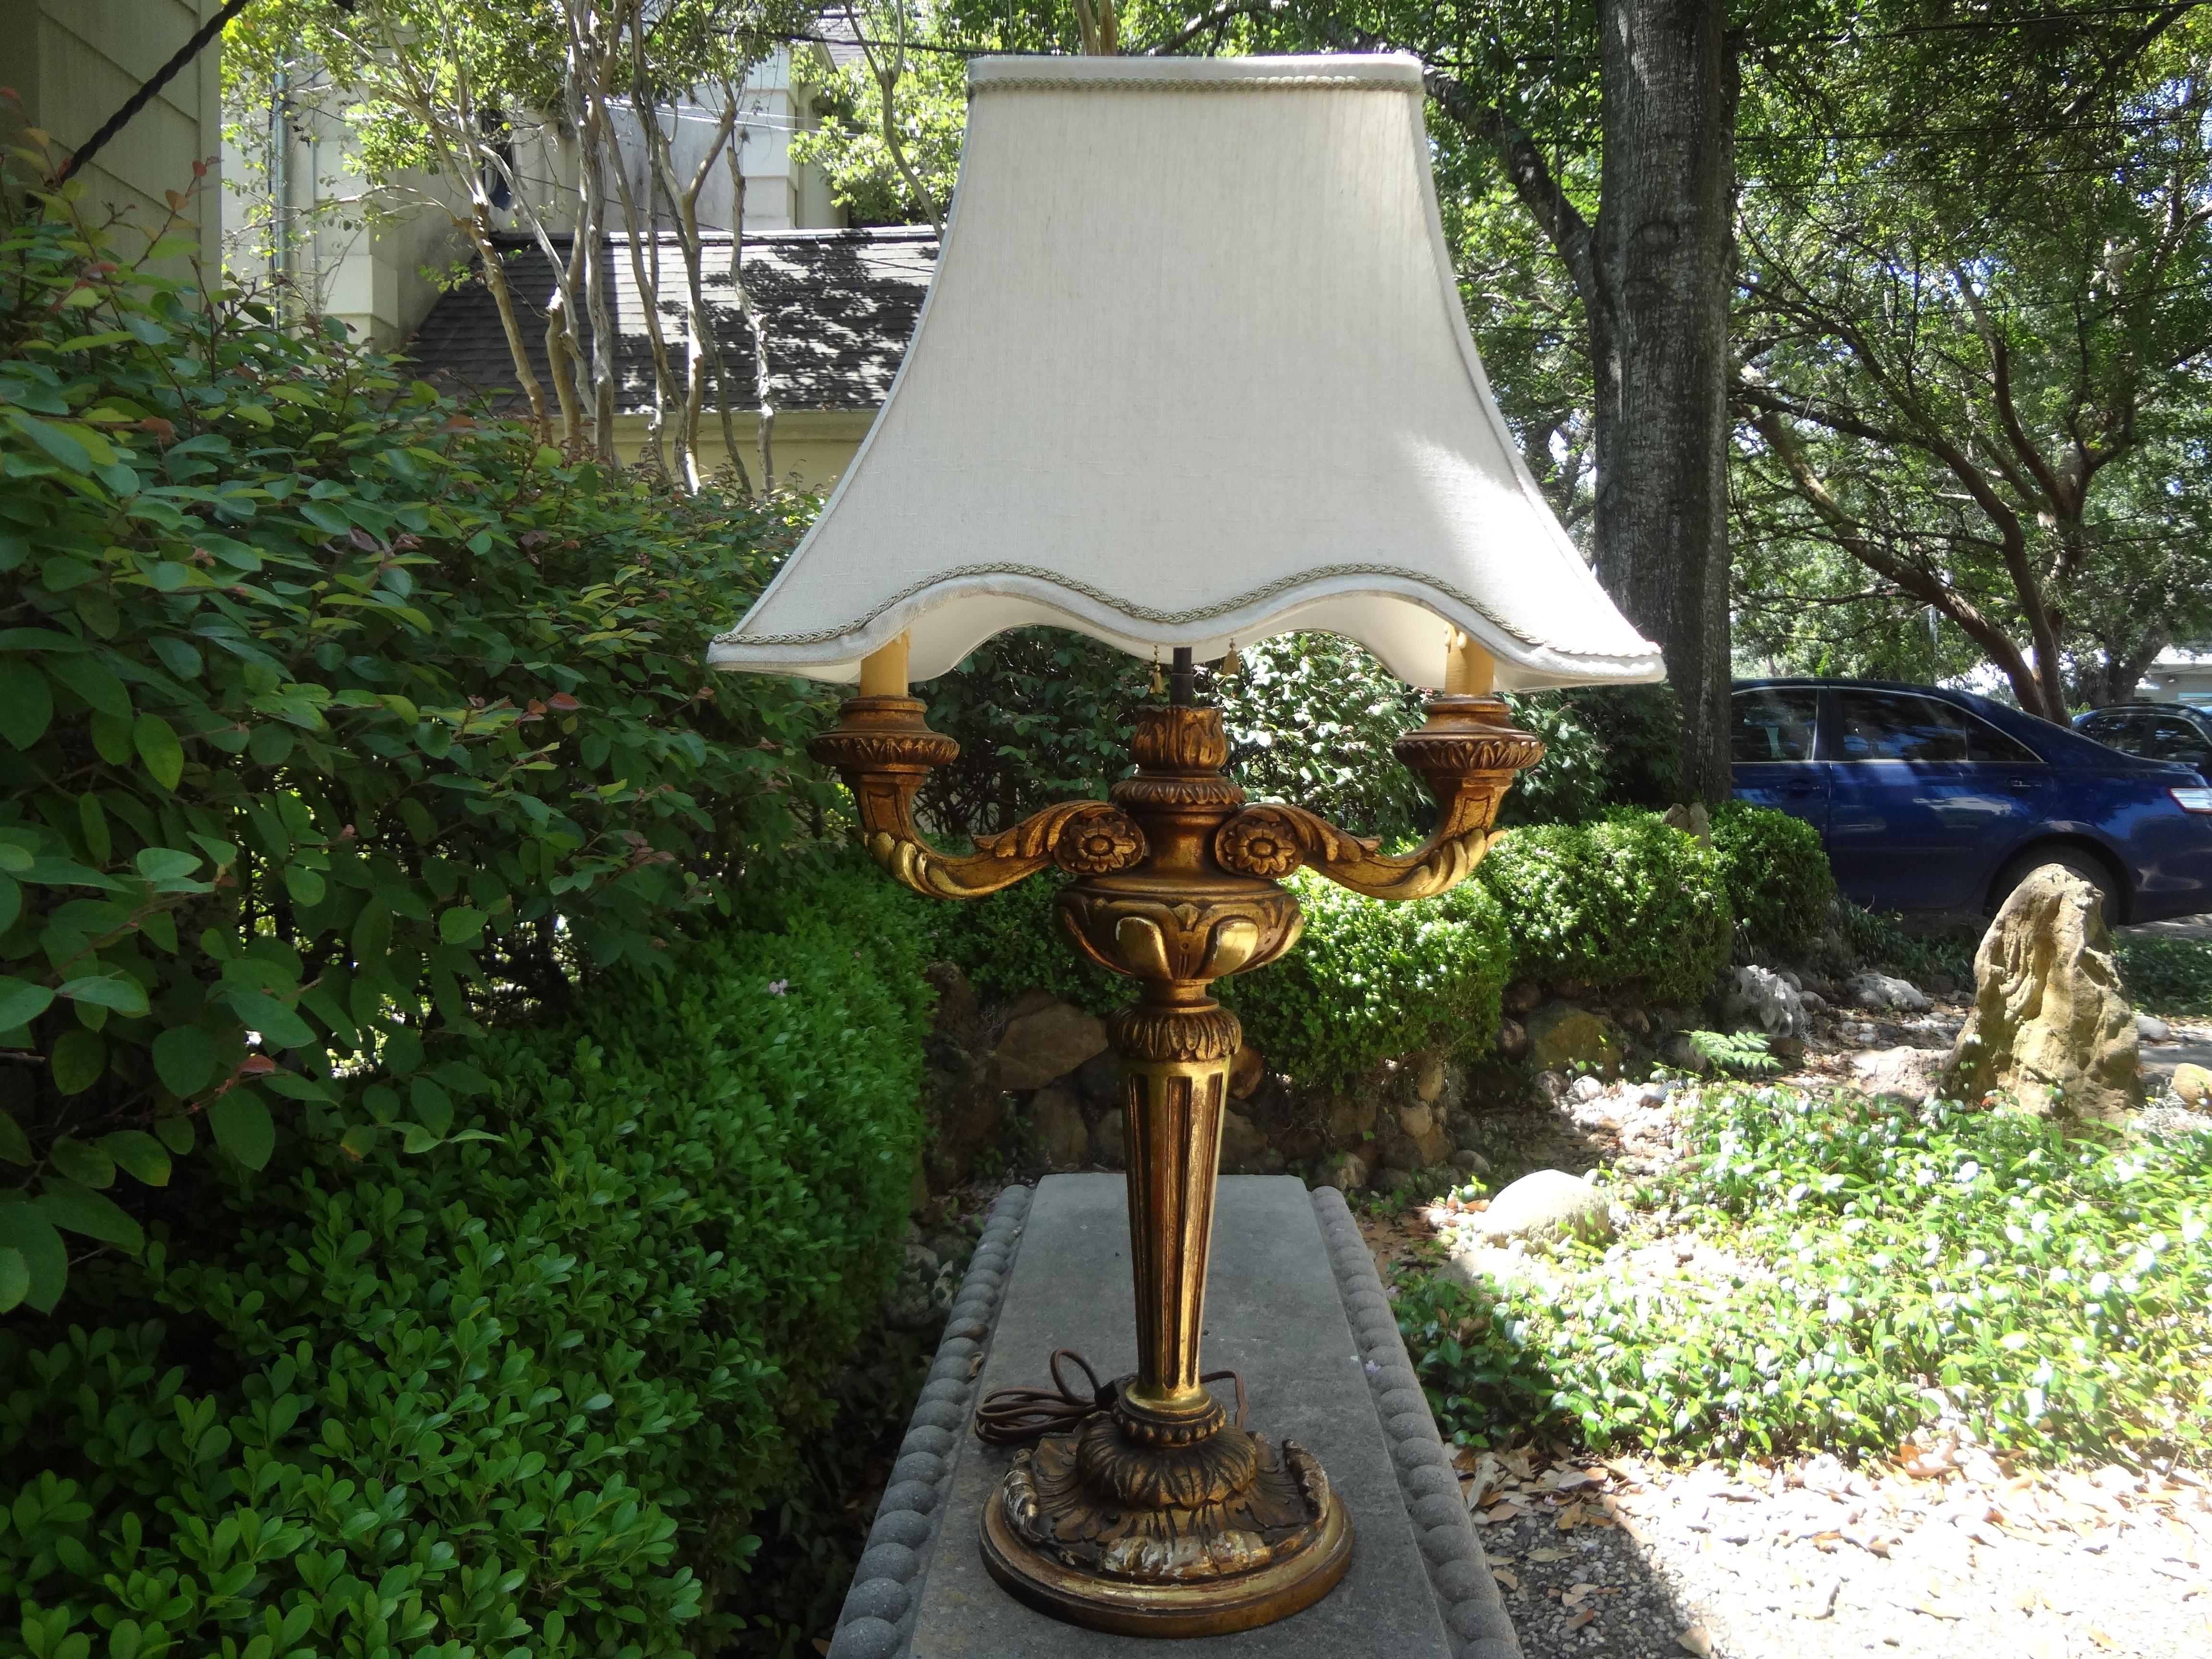 Antique Italian giltwood lamp.
Stunning antique Italian giltwood lamp. This lovely Italian gilt lamp has been newly wired to U.S. specifications. Gorgeous patina.
Dimensions of lamp only: Shade not included. Not in usable condition and best to